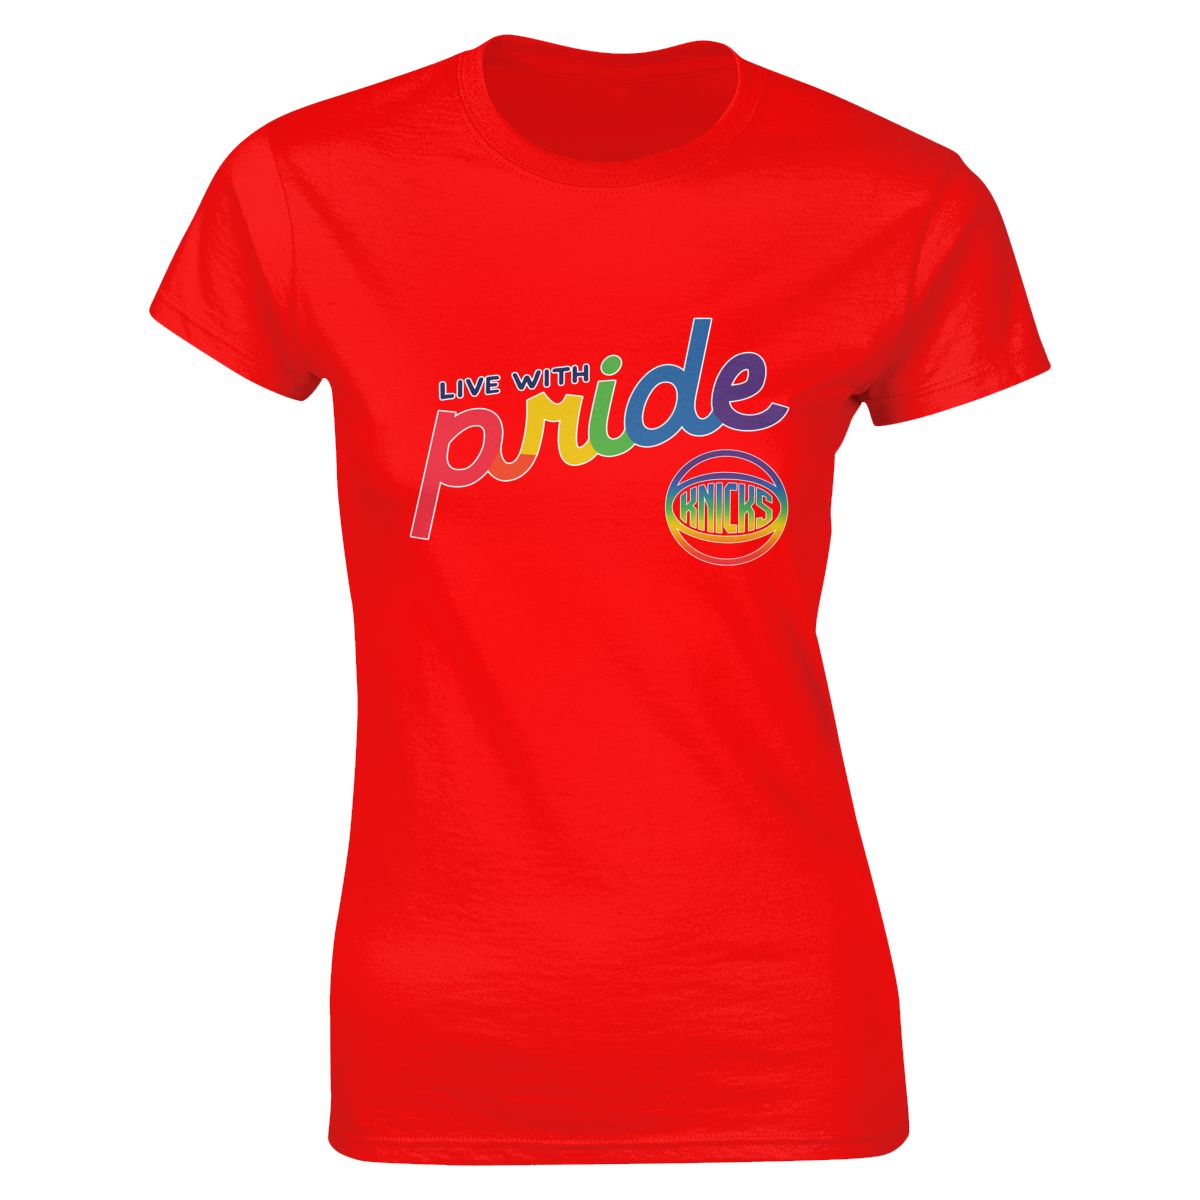 New York Knicks Live With Pride Women's Short-Sleeve Cotton Tee